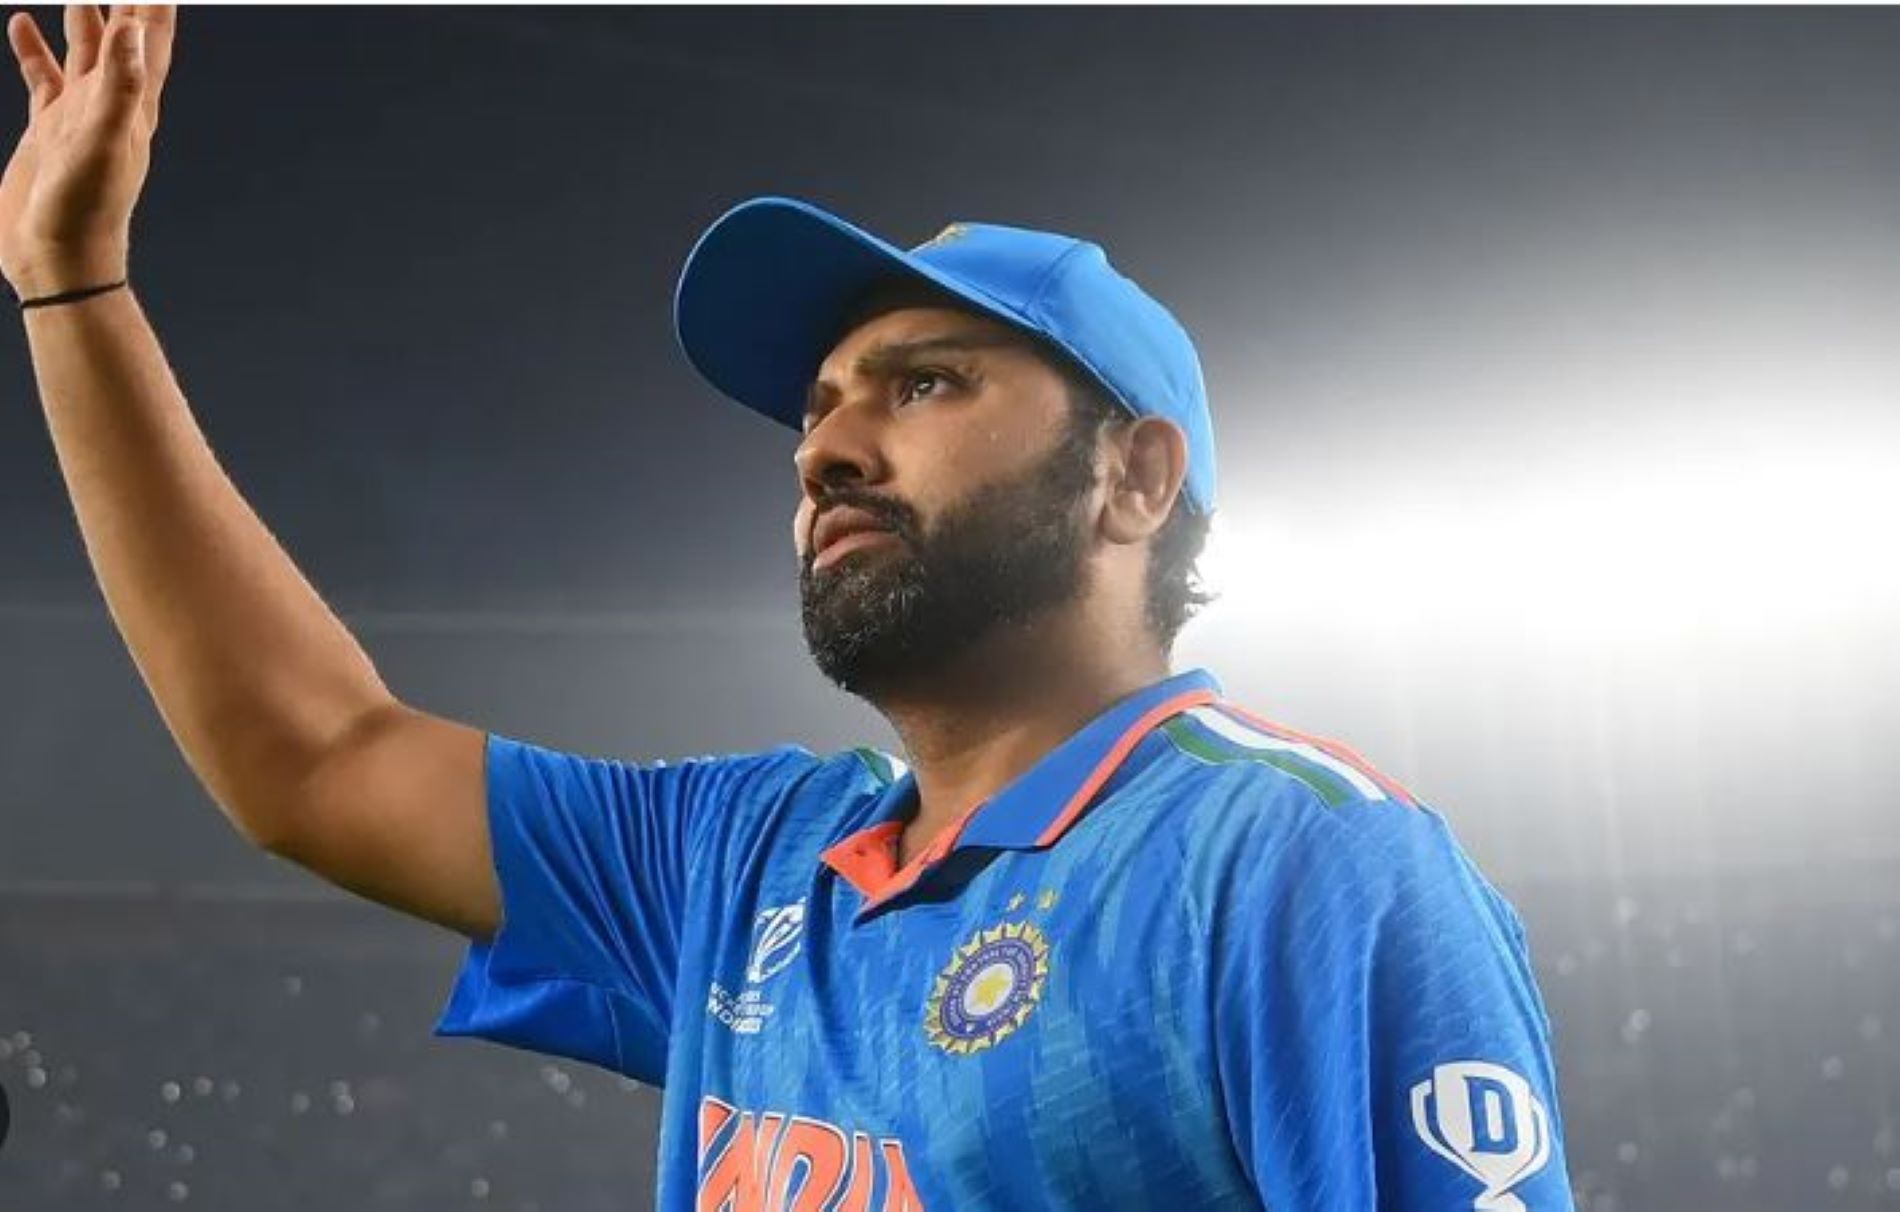 Rohit has led Team India admirably in the ongoing World Cup